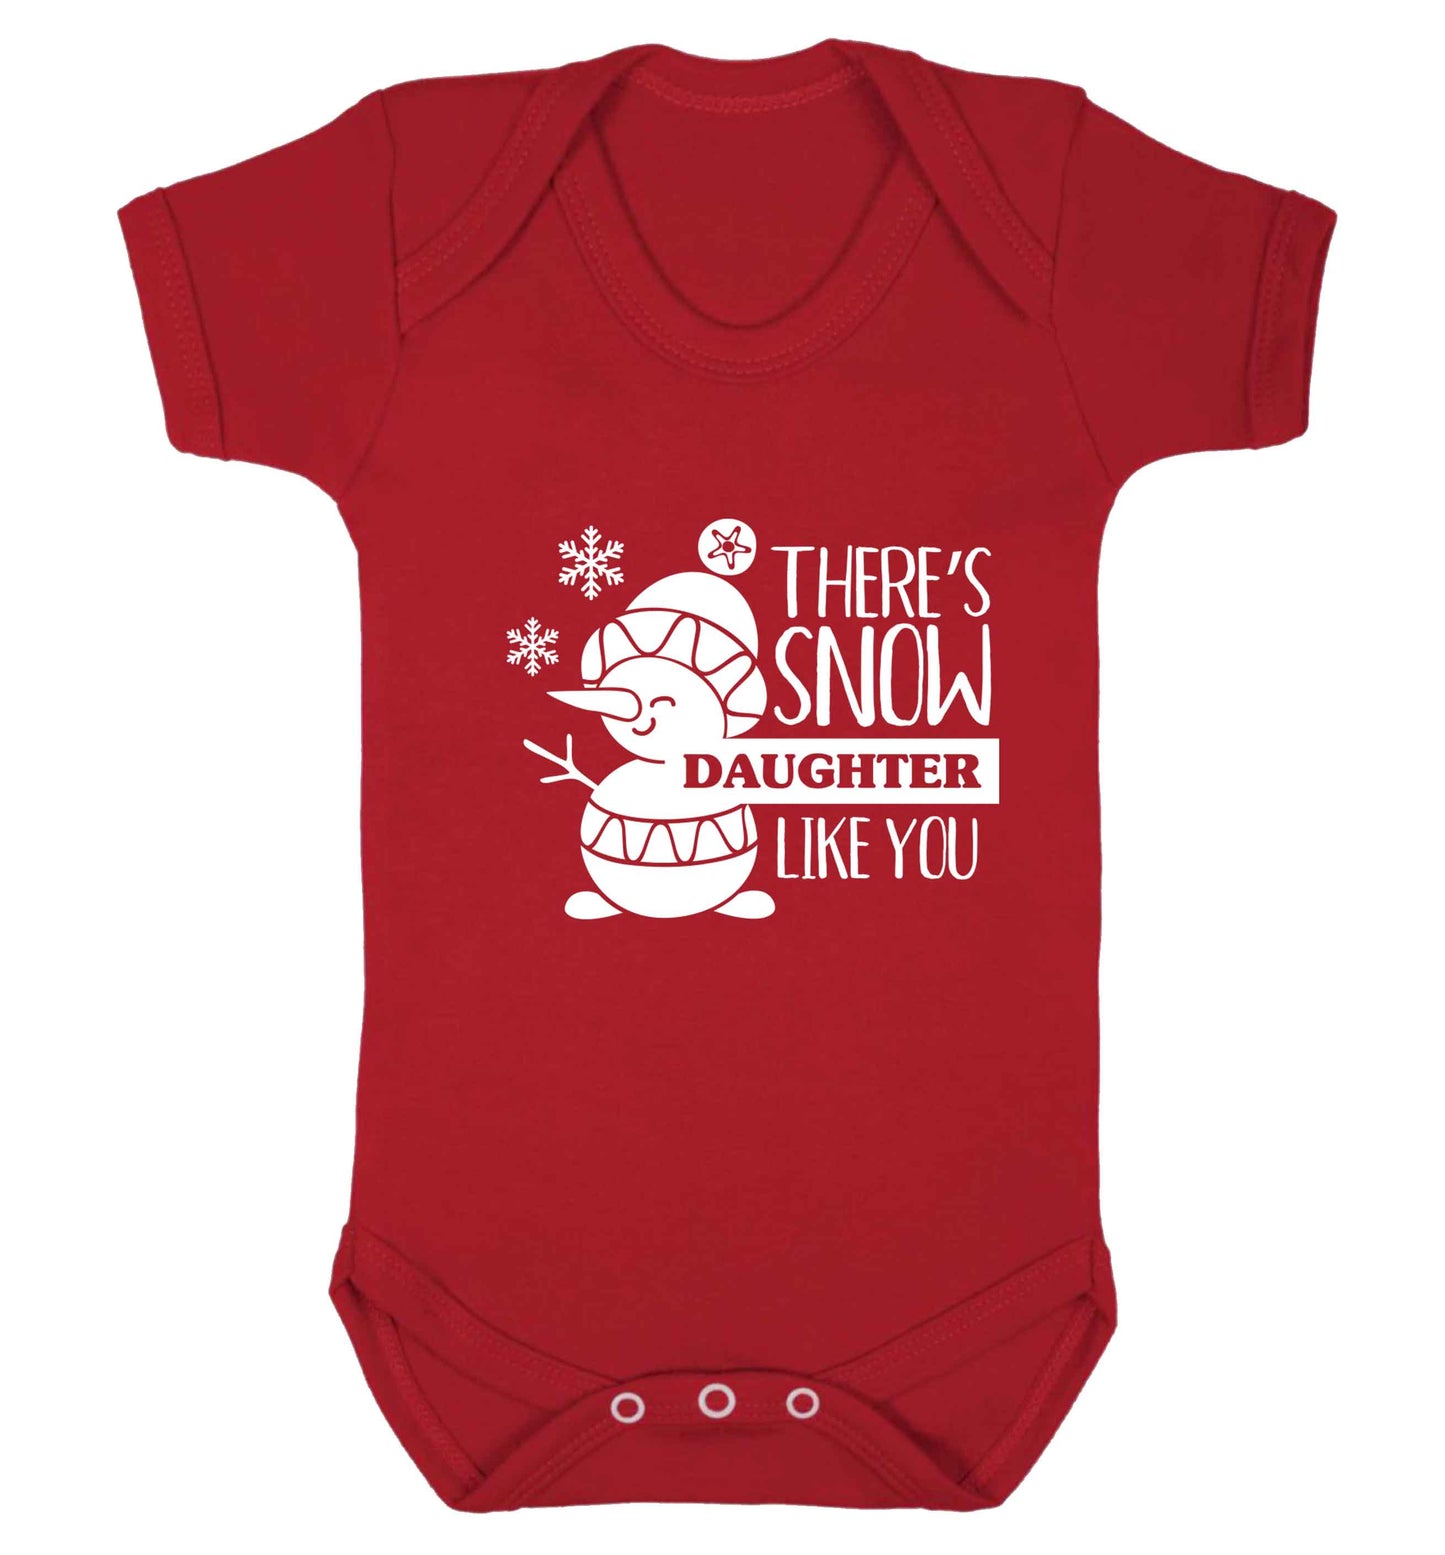 There's snow daughter like you baby vest red 18-24 months